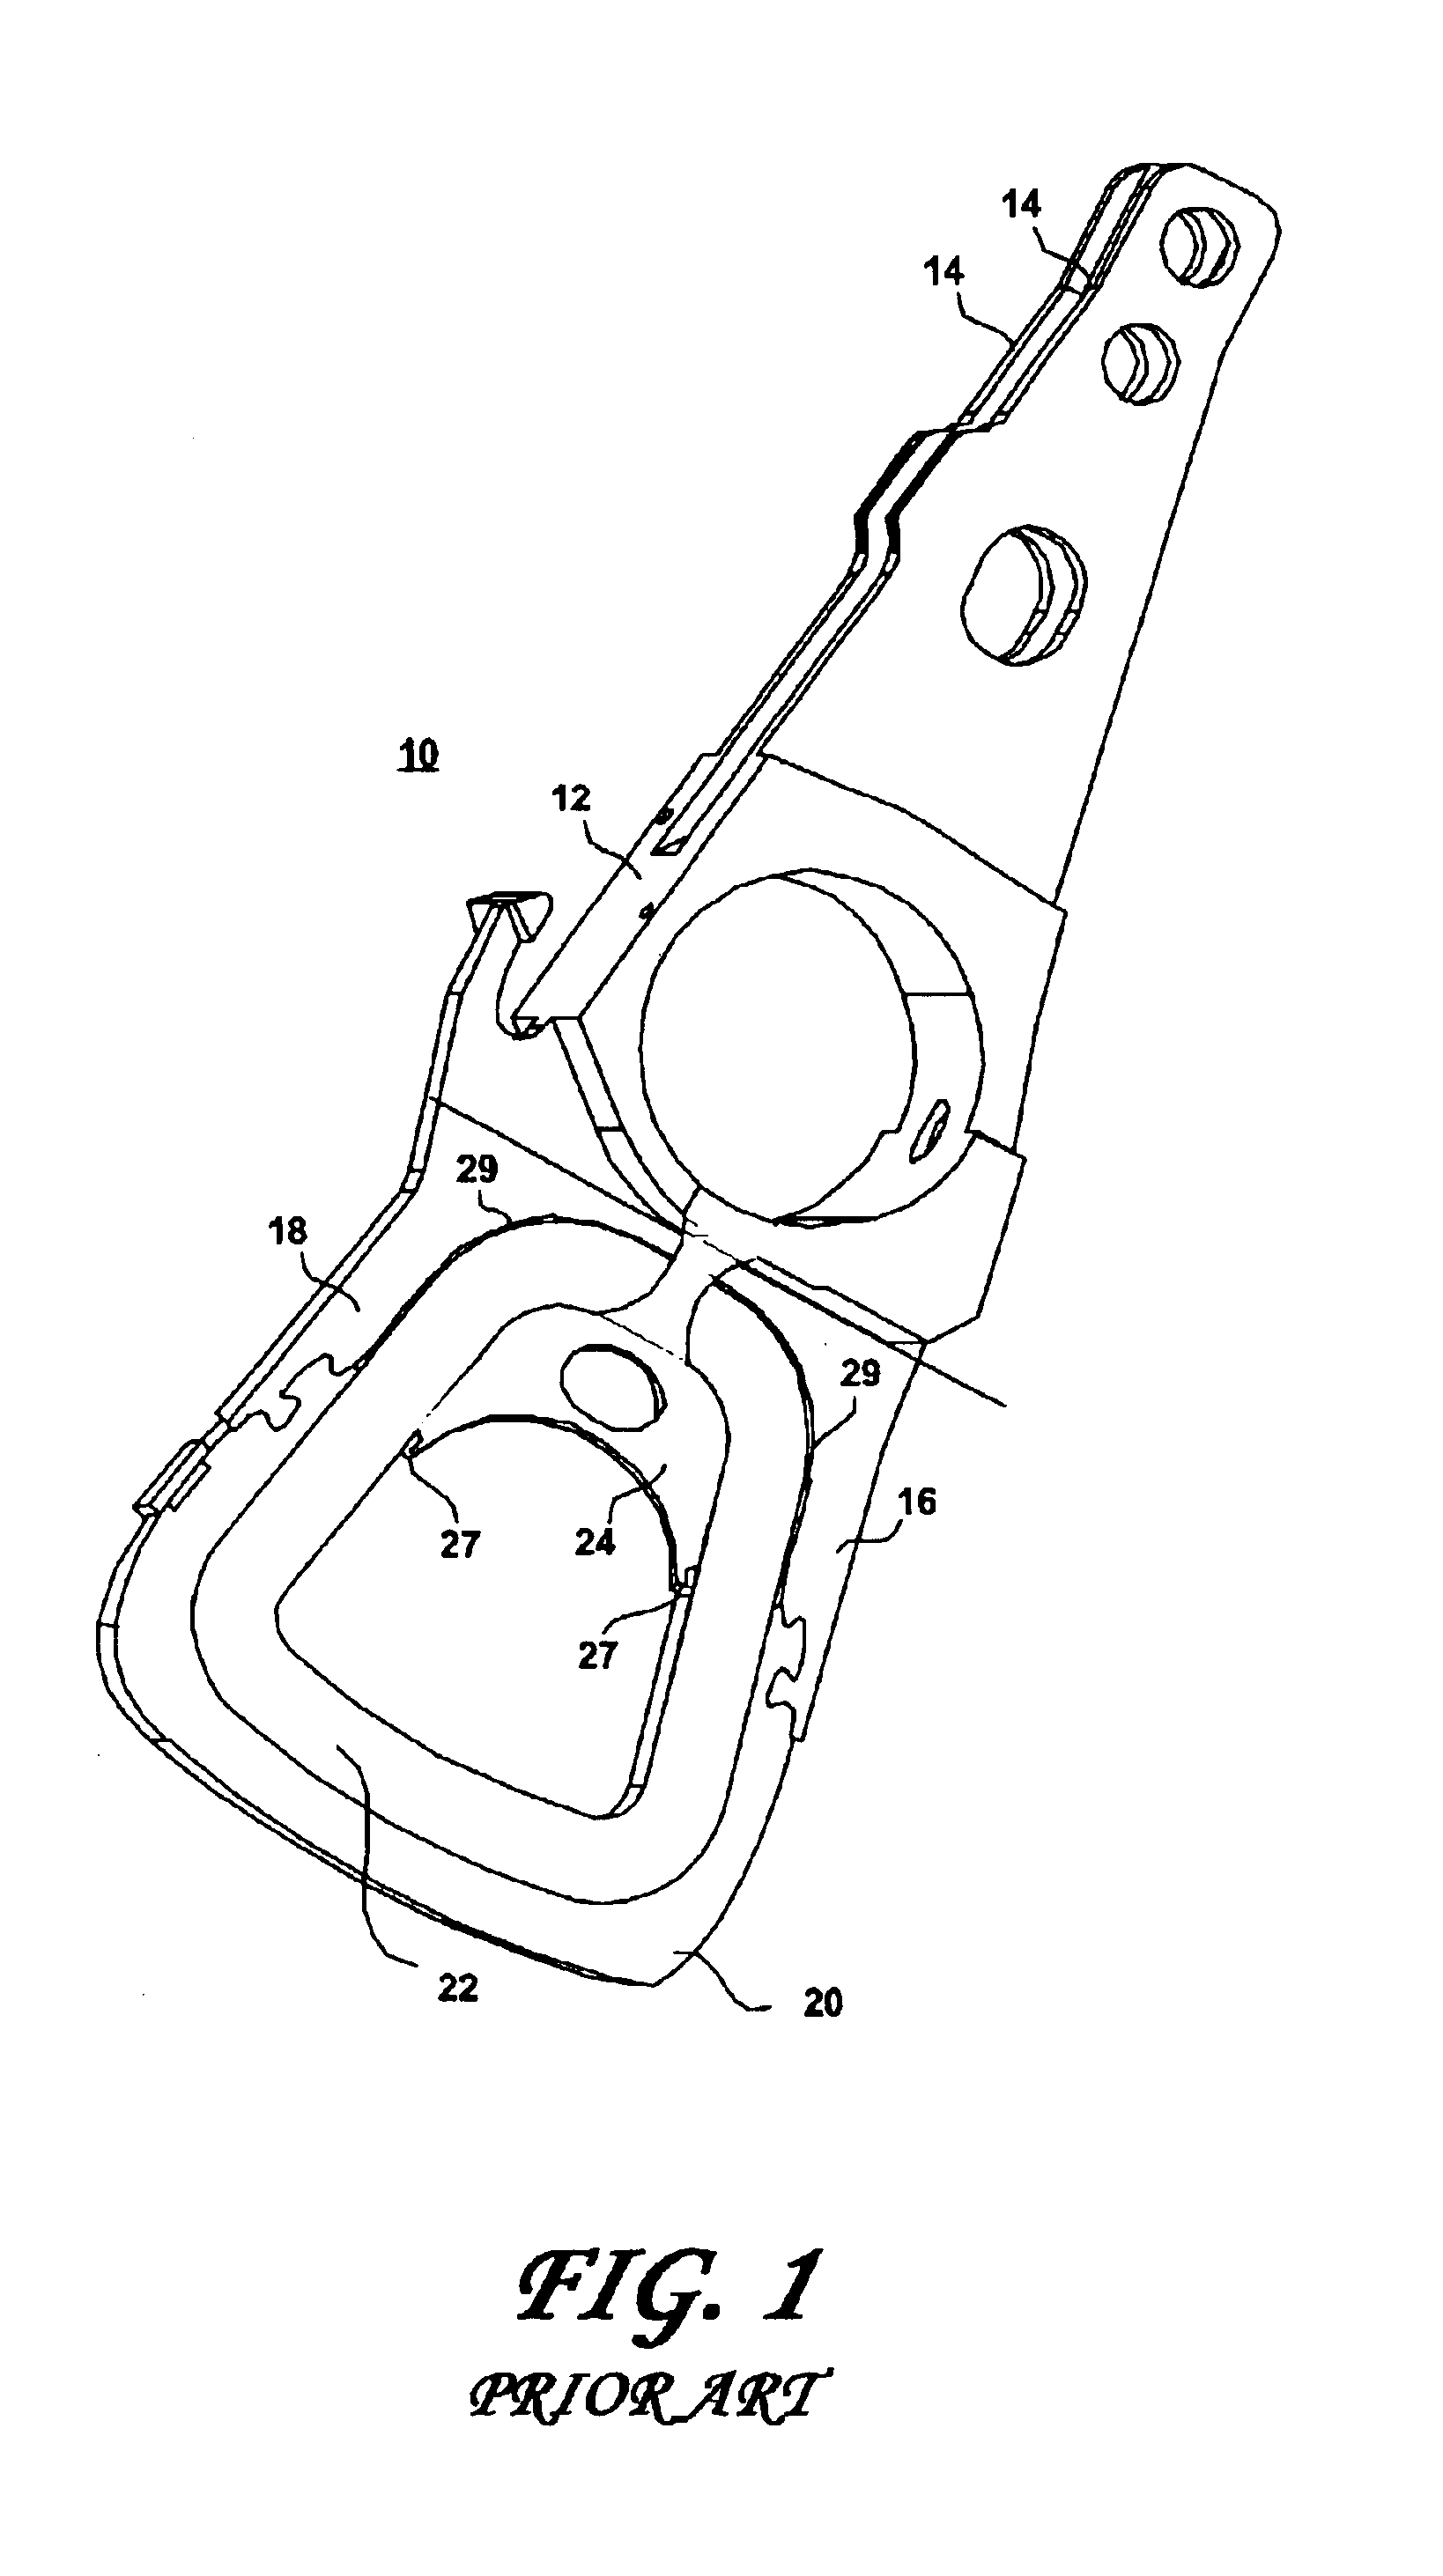 Cleating features to improve adhesive interface between a bobbin and a coil of an actuator coil portion of a hard disk drive